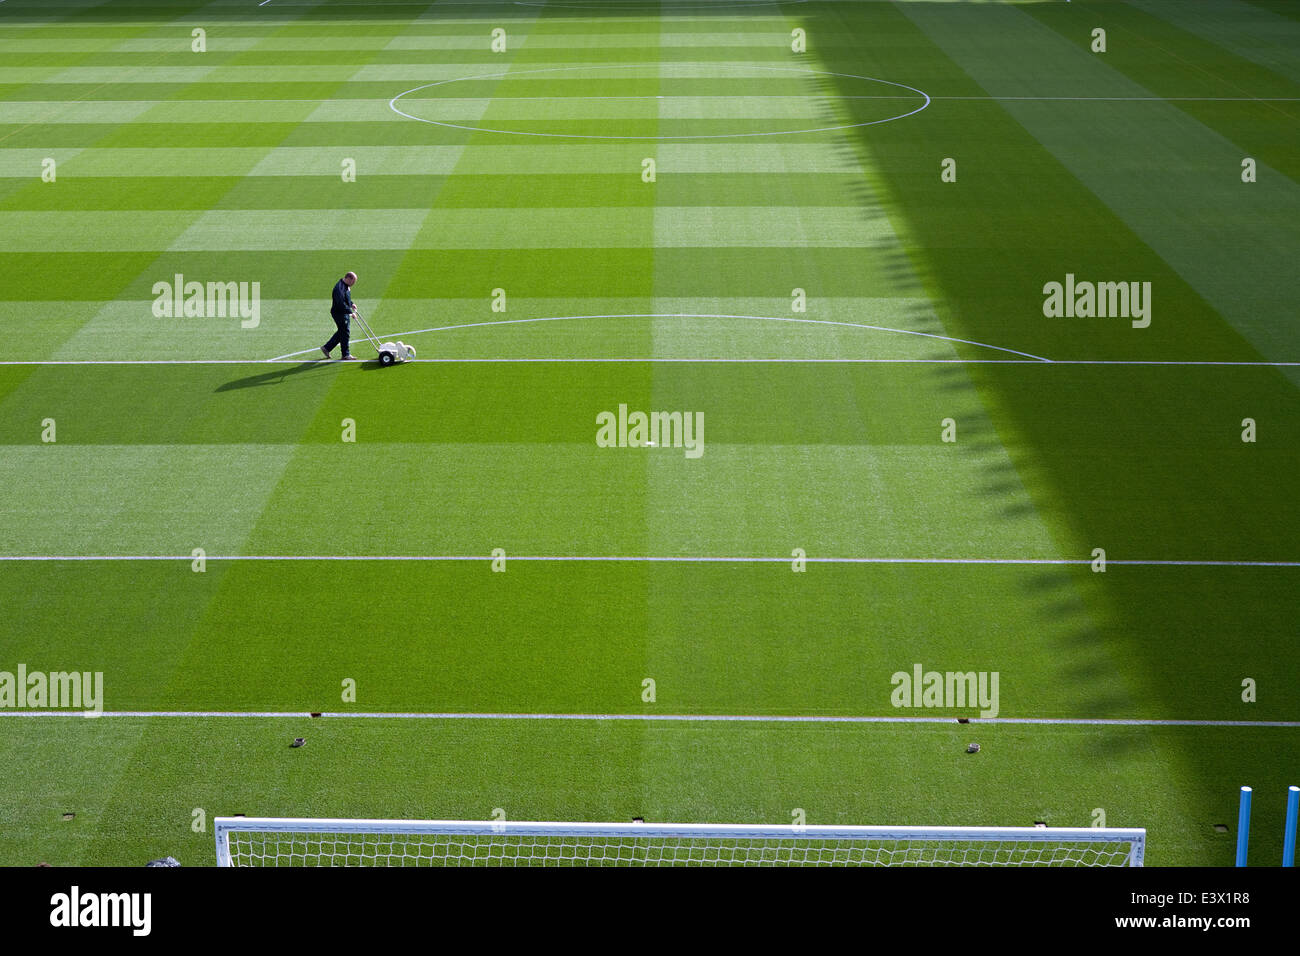 A man marking out a football pitch before a match Stock Photo